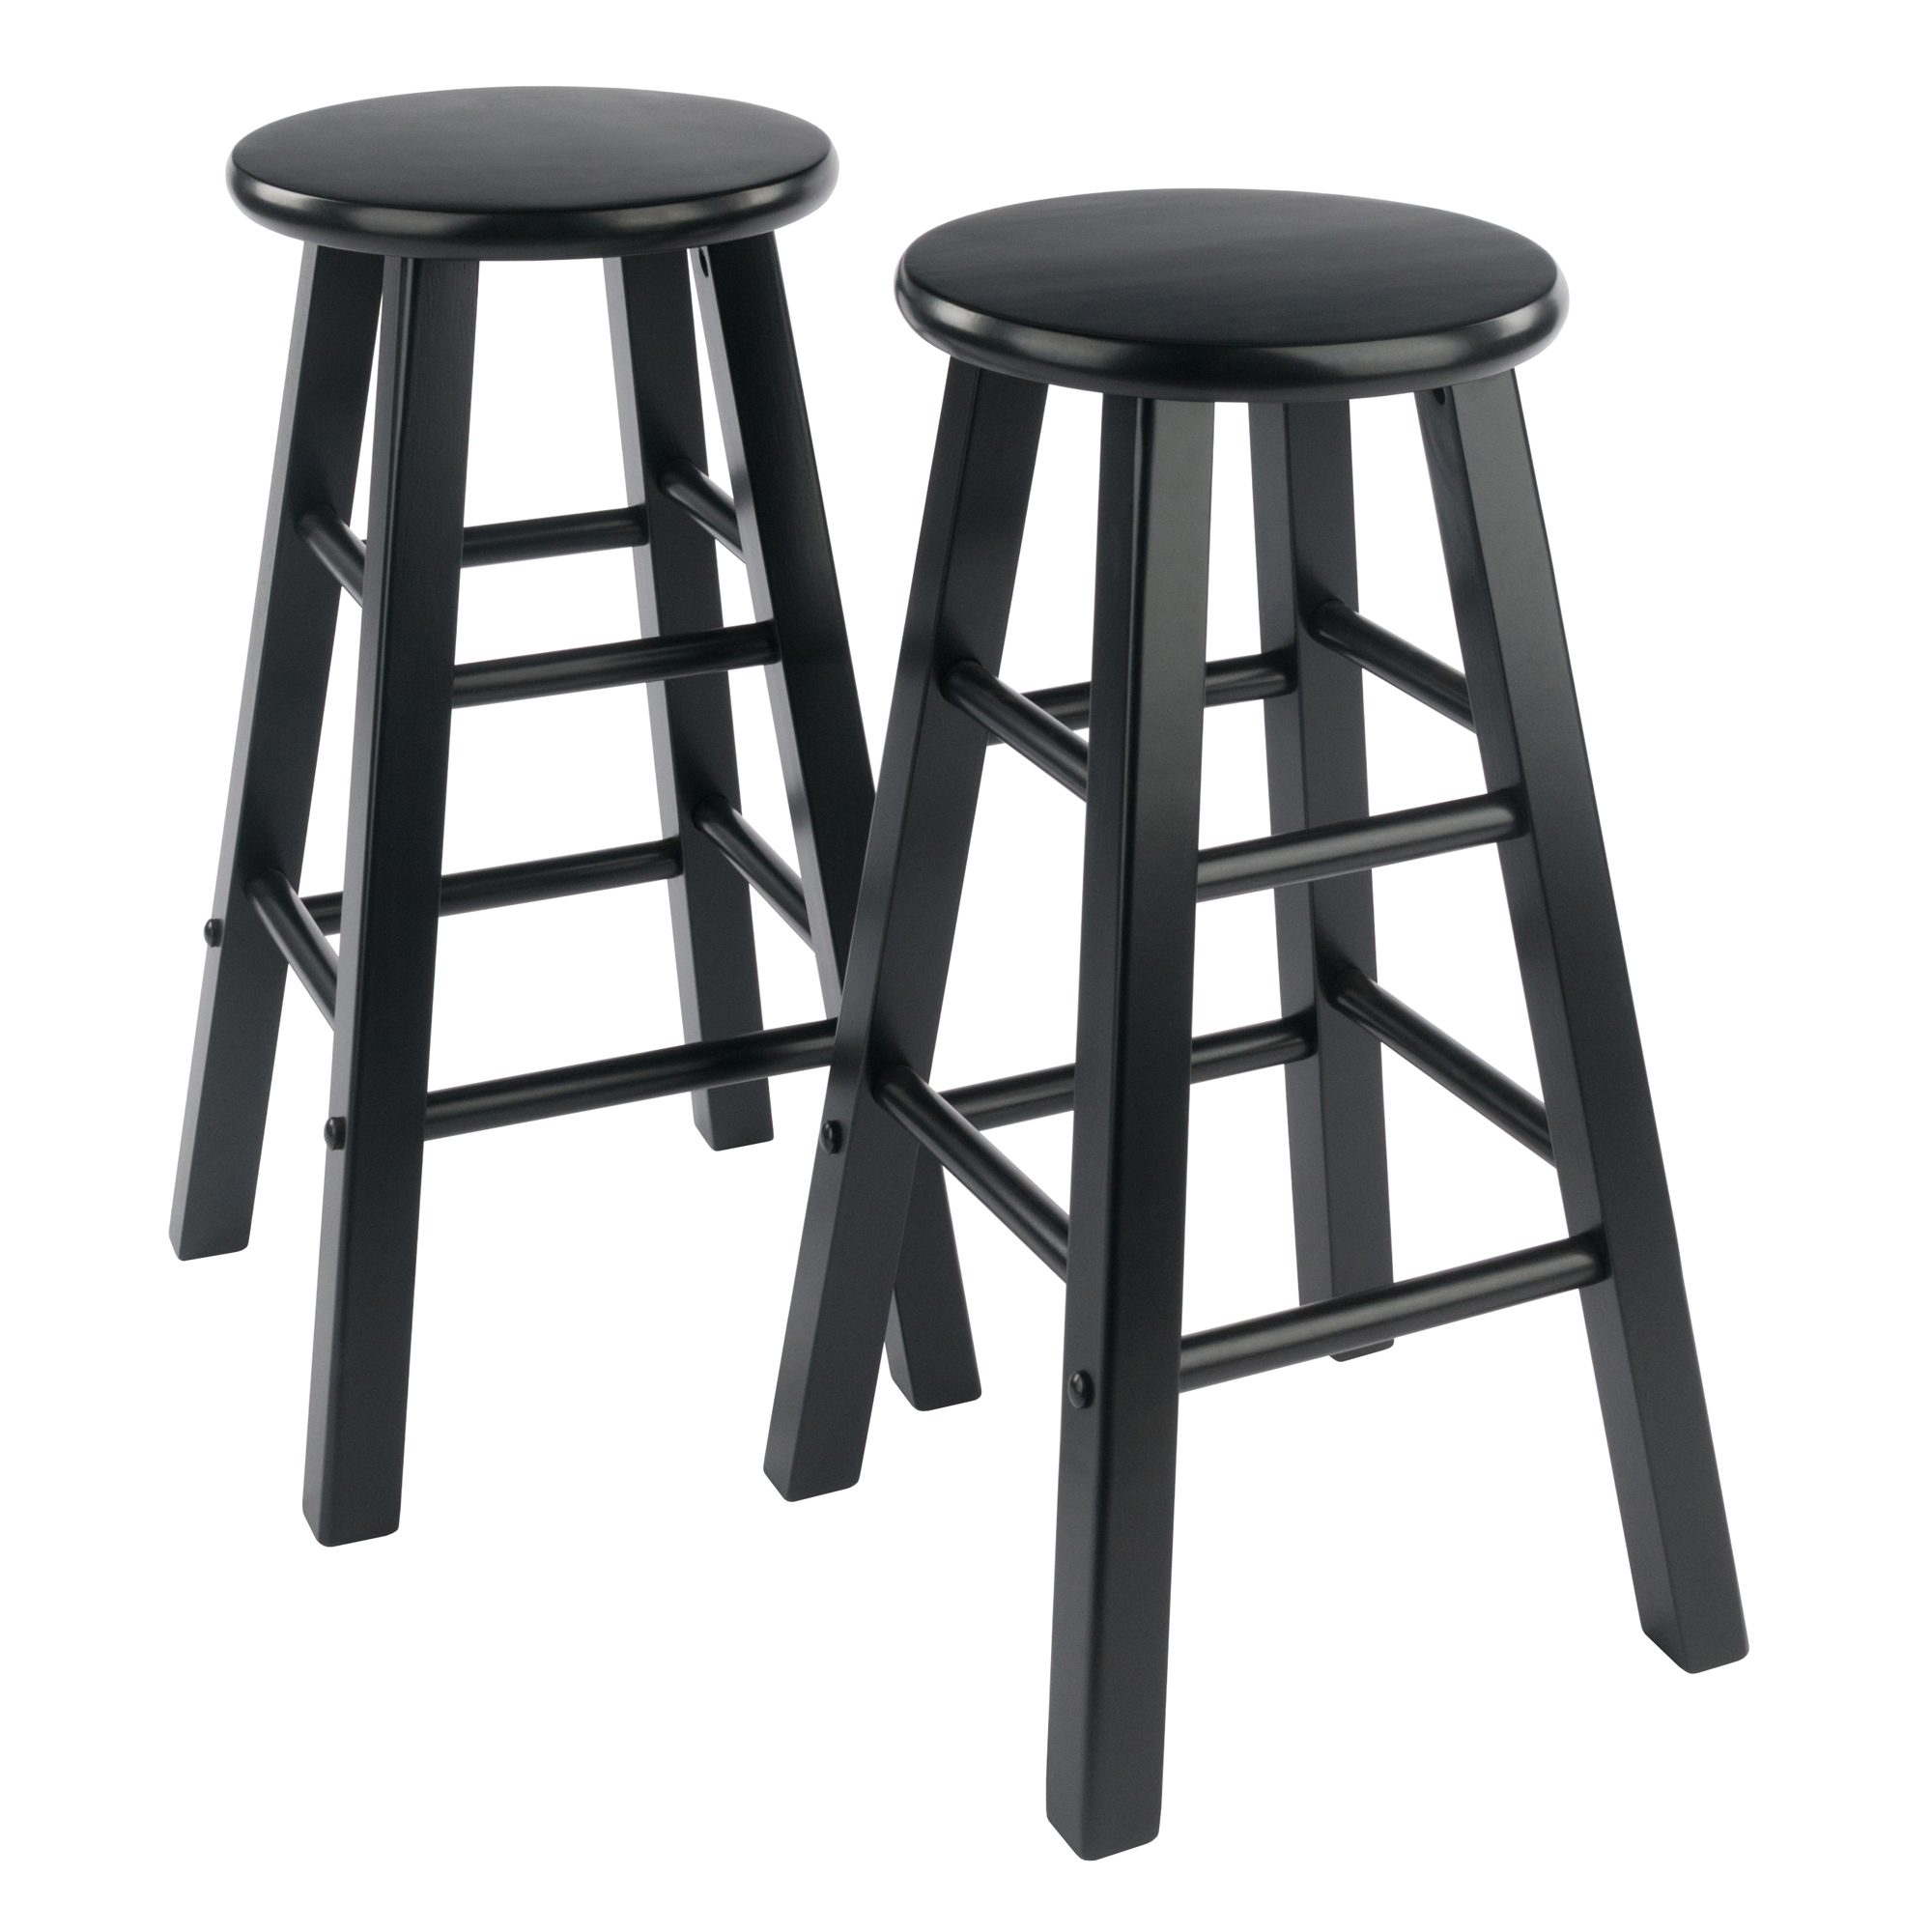 Winsome Wood Element 2-Piece Counter Stools, Black Finish - image 1 of 7